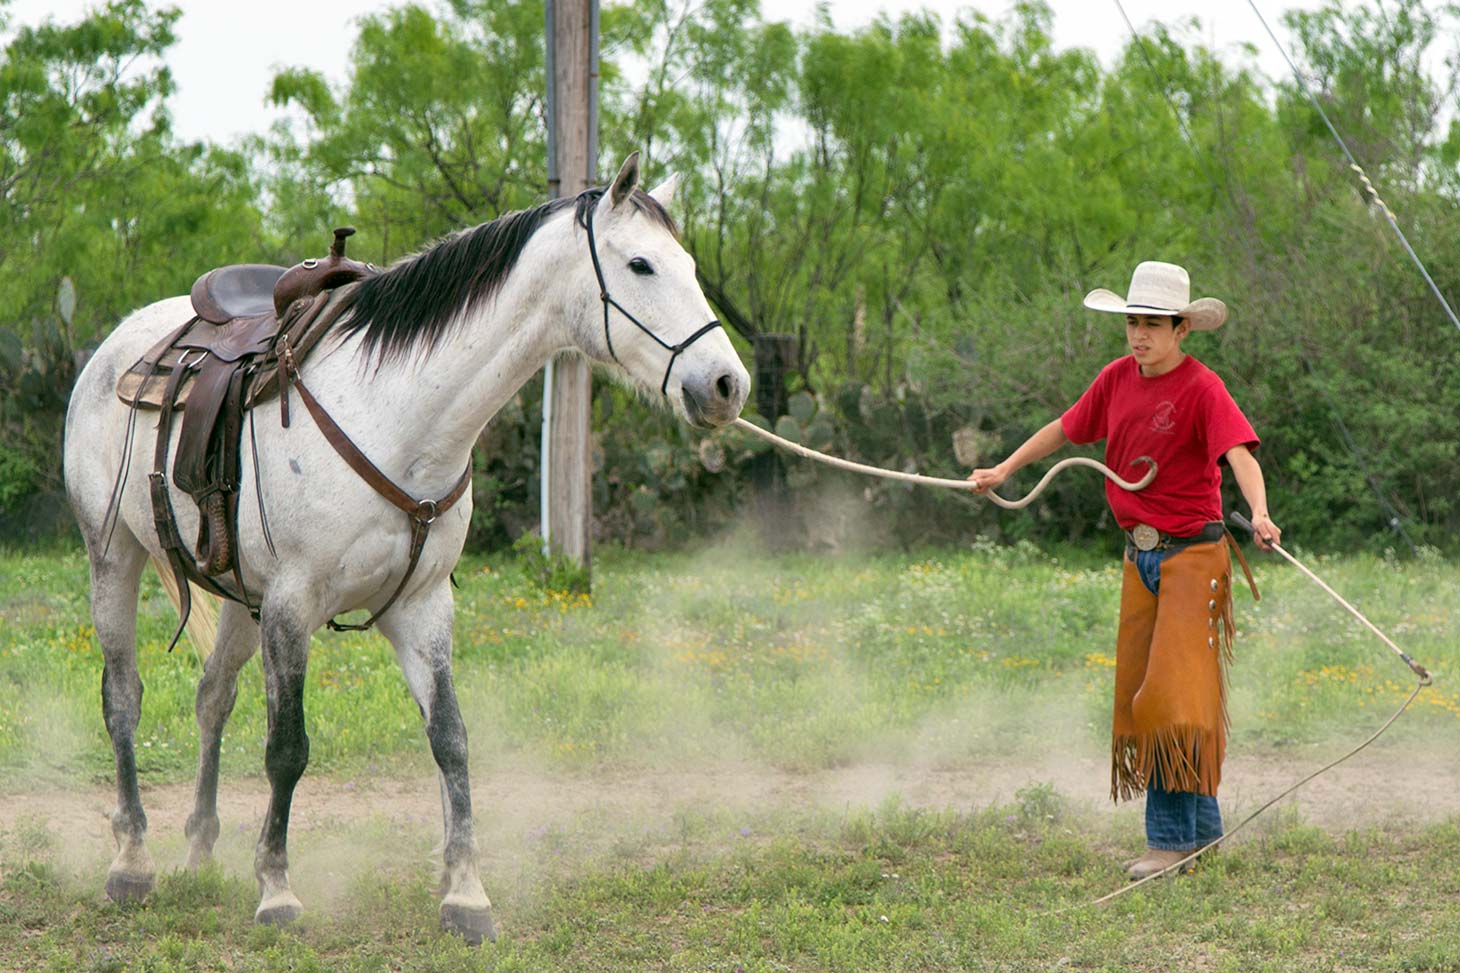 Delphino Jr is following in his brother Reyes' footsteps and is also starting horses for the ranch